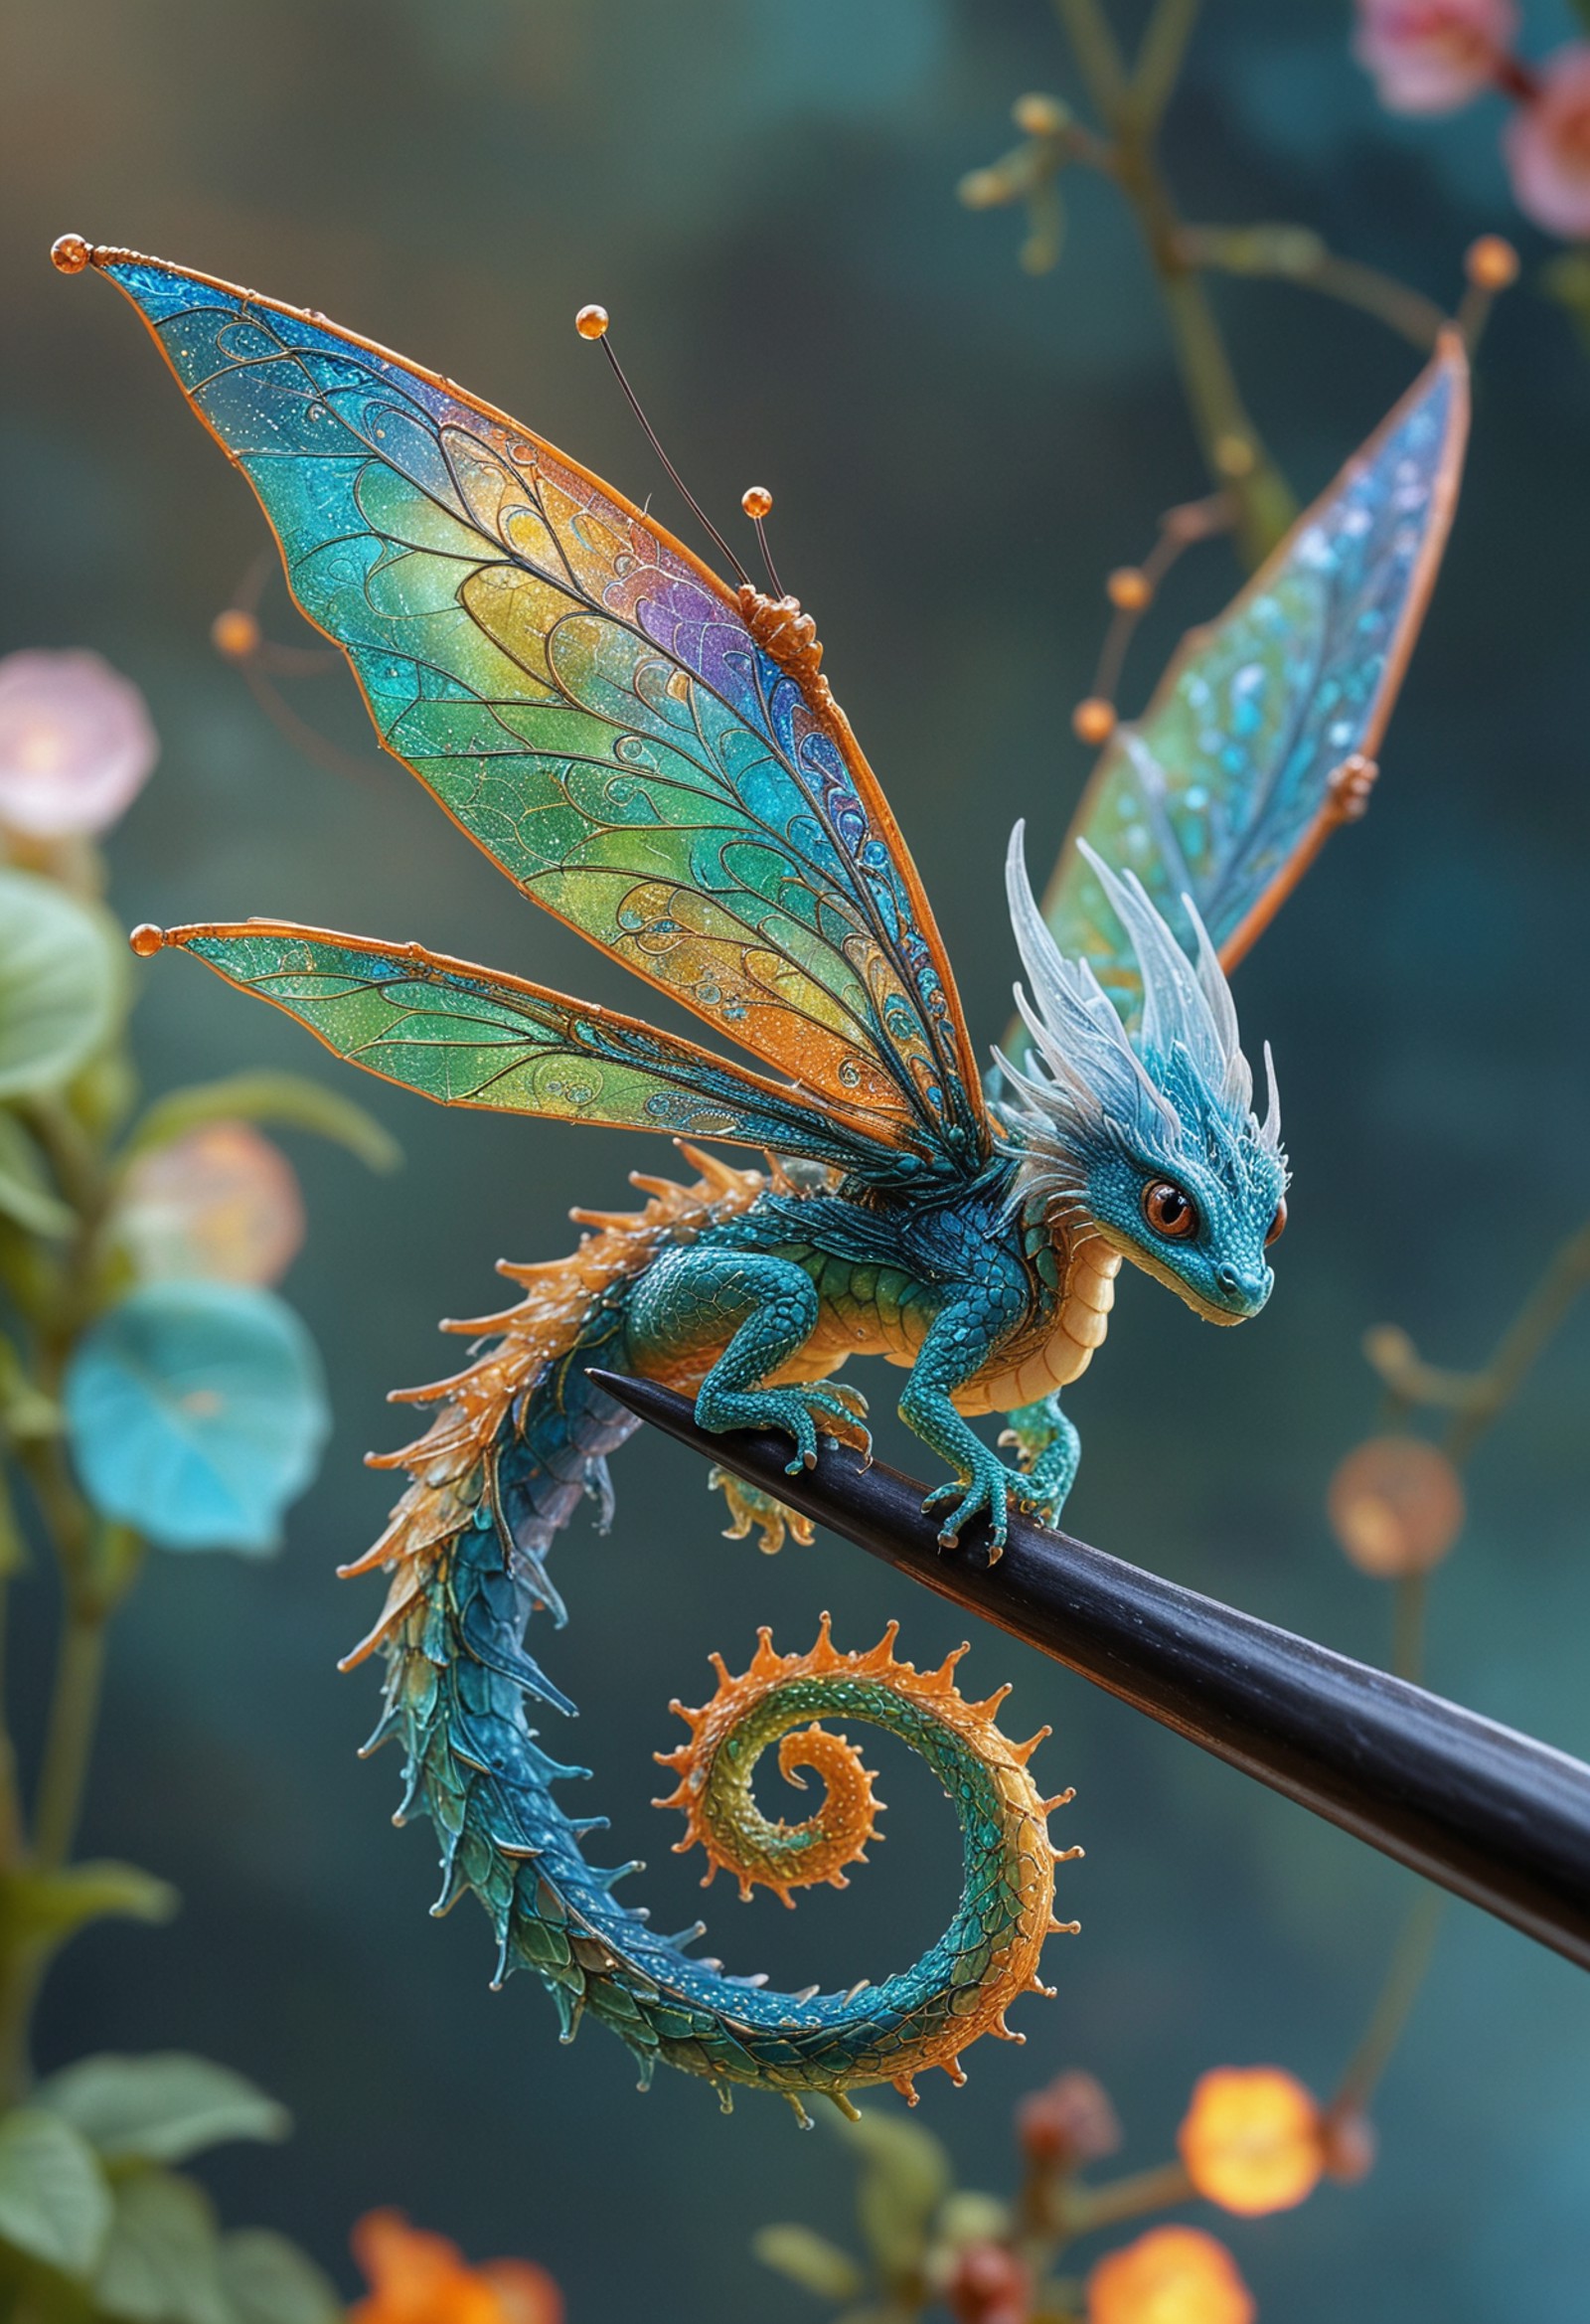 A highly detailed scene of a micro miniature fairy-like dragon perched on a tip of a needle, The dragon has vibrant irides...